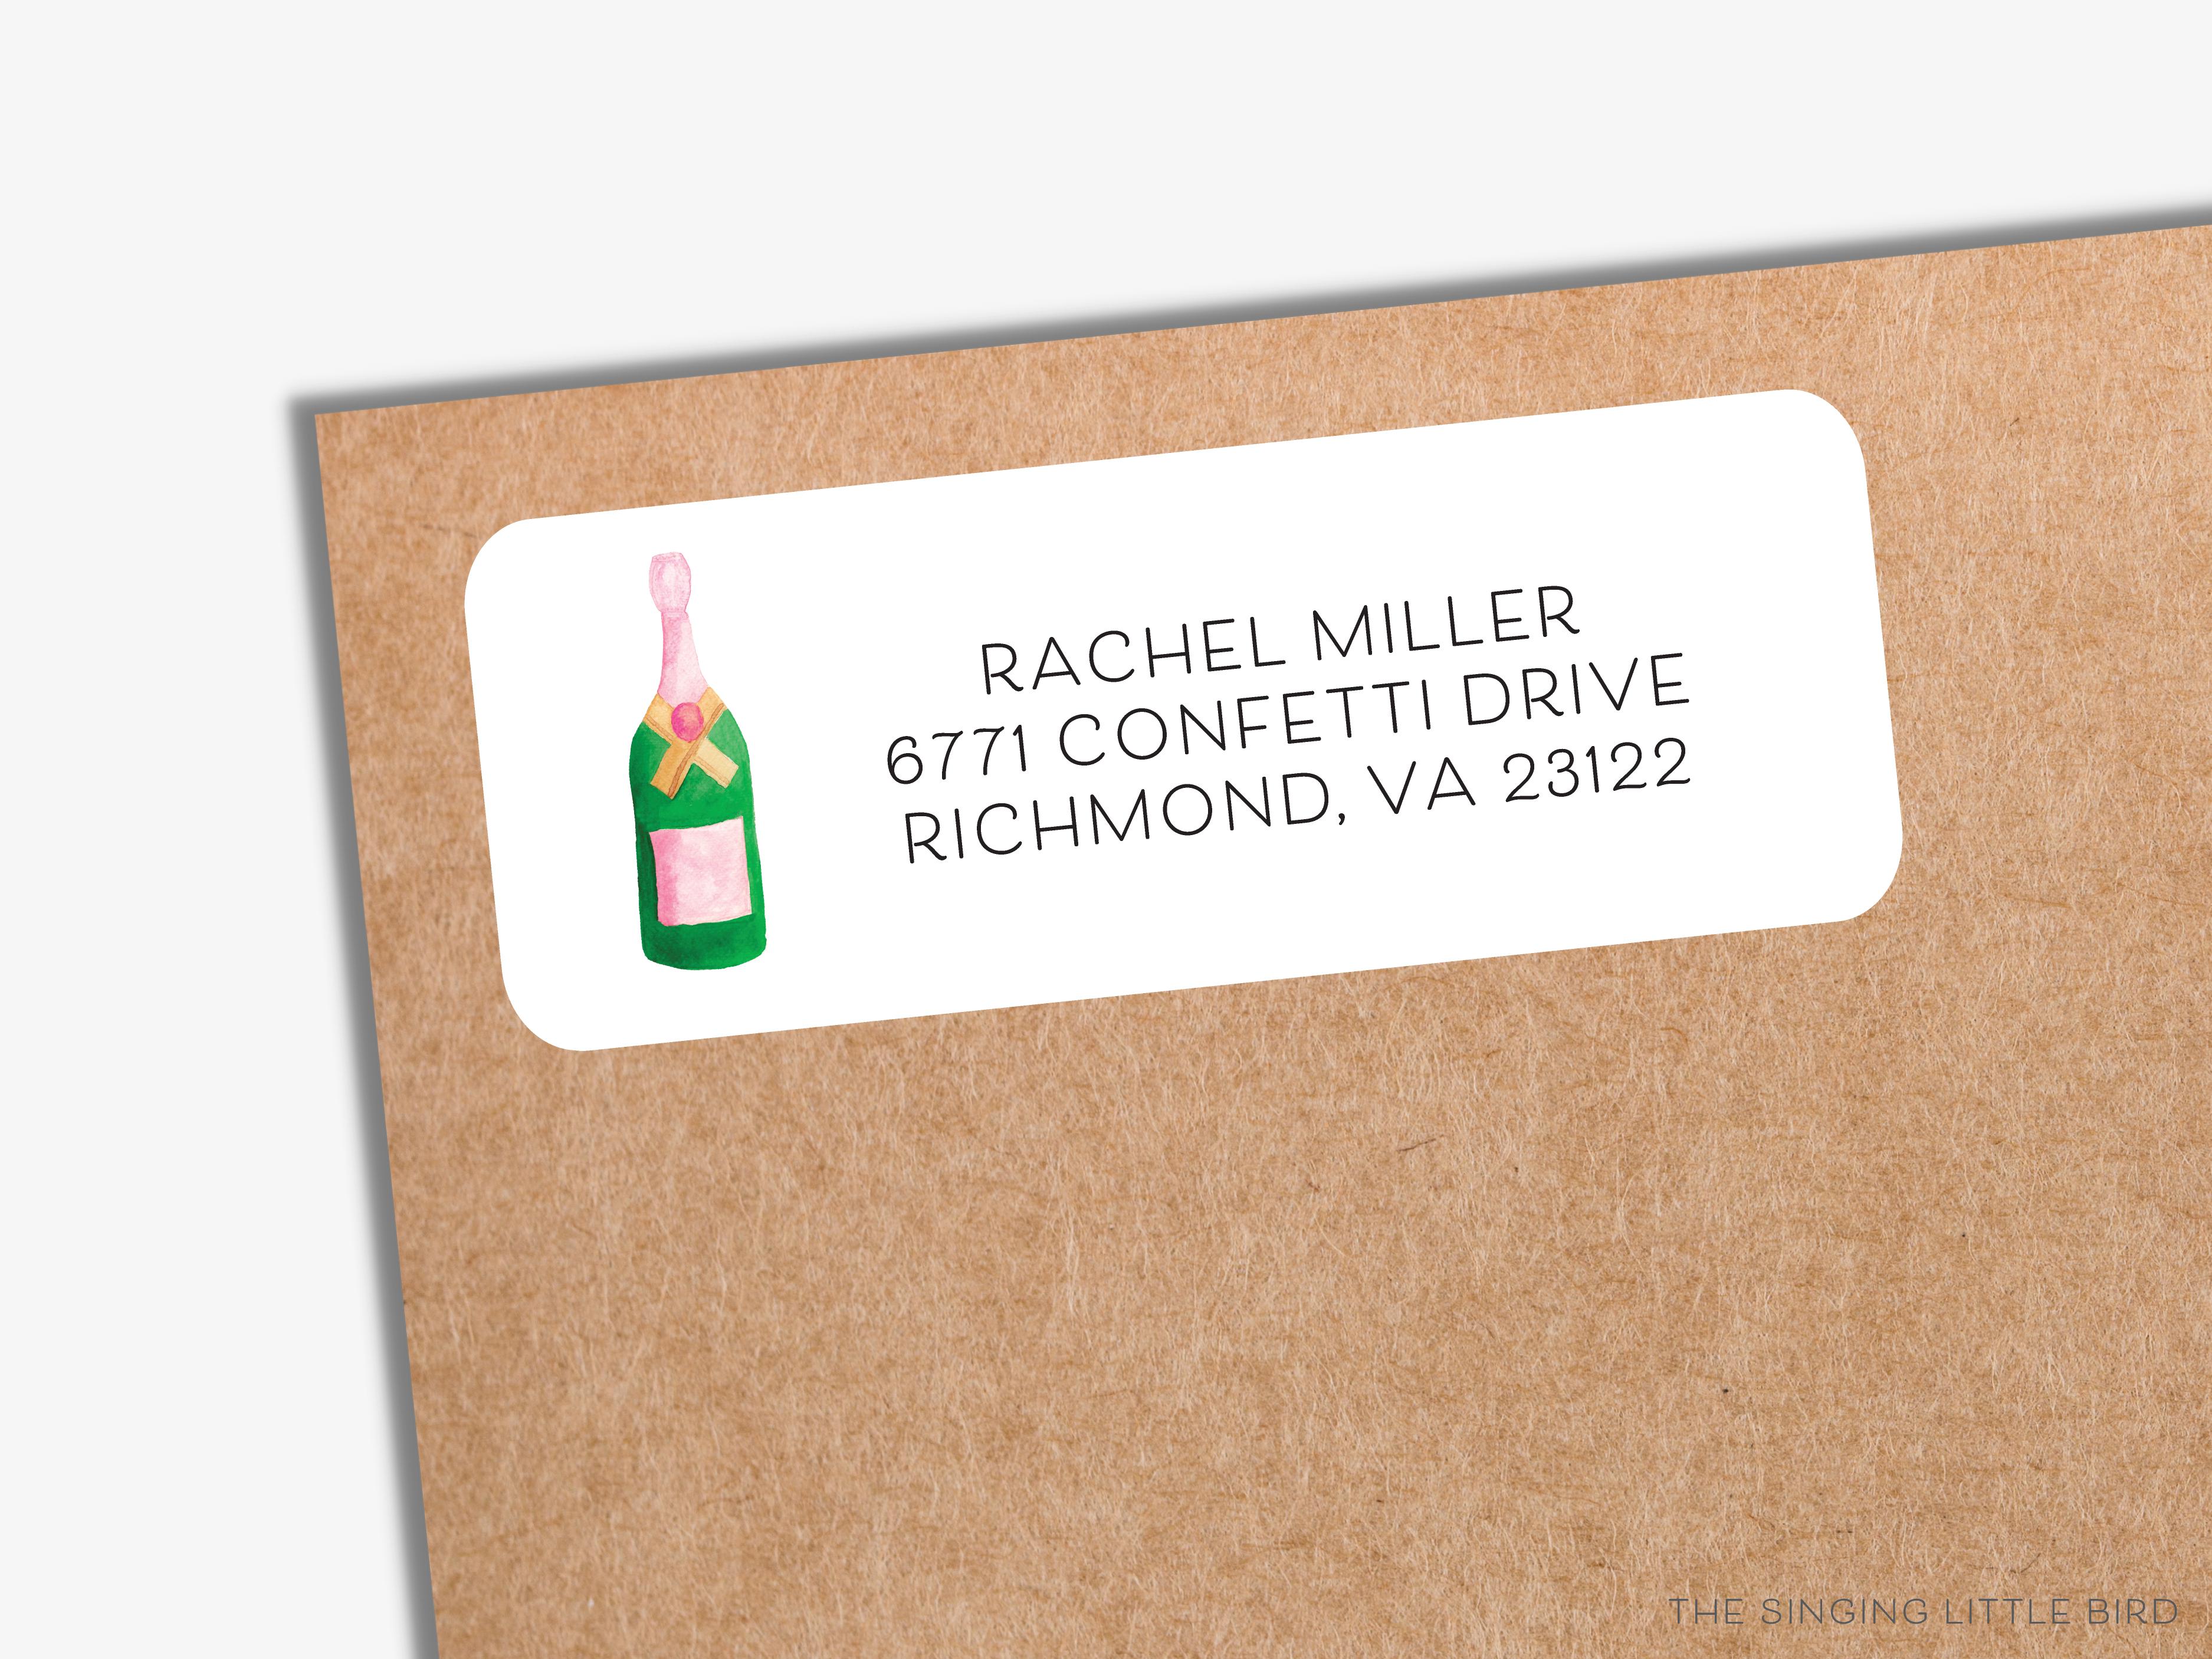 Champagne Bottle Return Address Labels-These personalized return address labels are 2.625" x 1" and feature our hand-painted watercolor Champagne Bottle, printed in the USA on beautiful matte finish labels. These make great gifts for yourself or the bubbly lover.-The Singing Little Bird